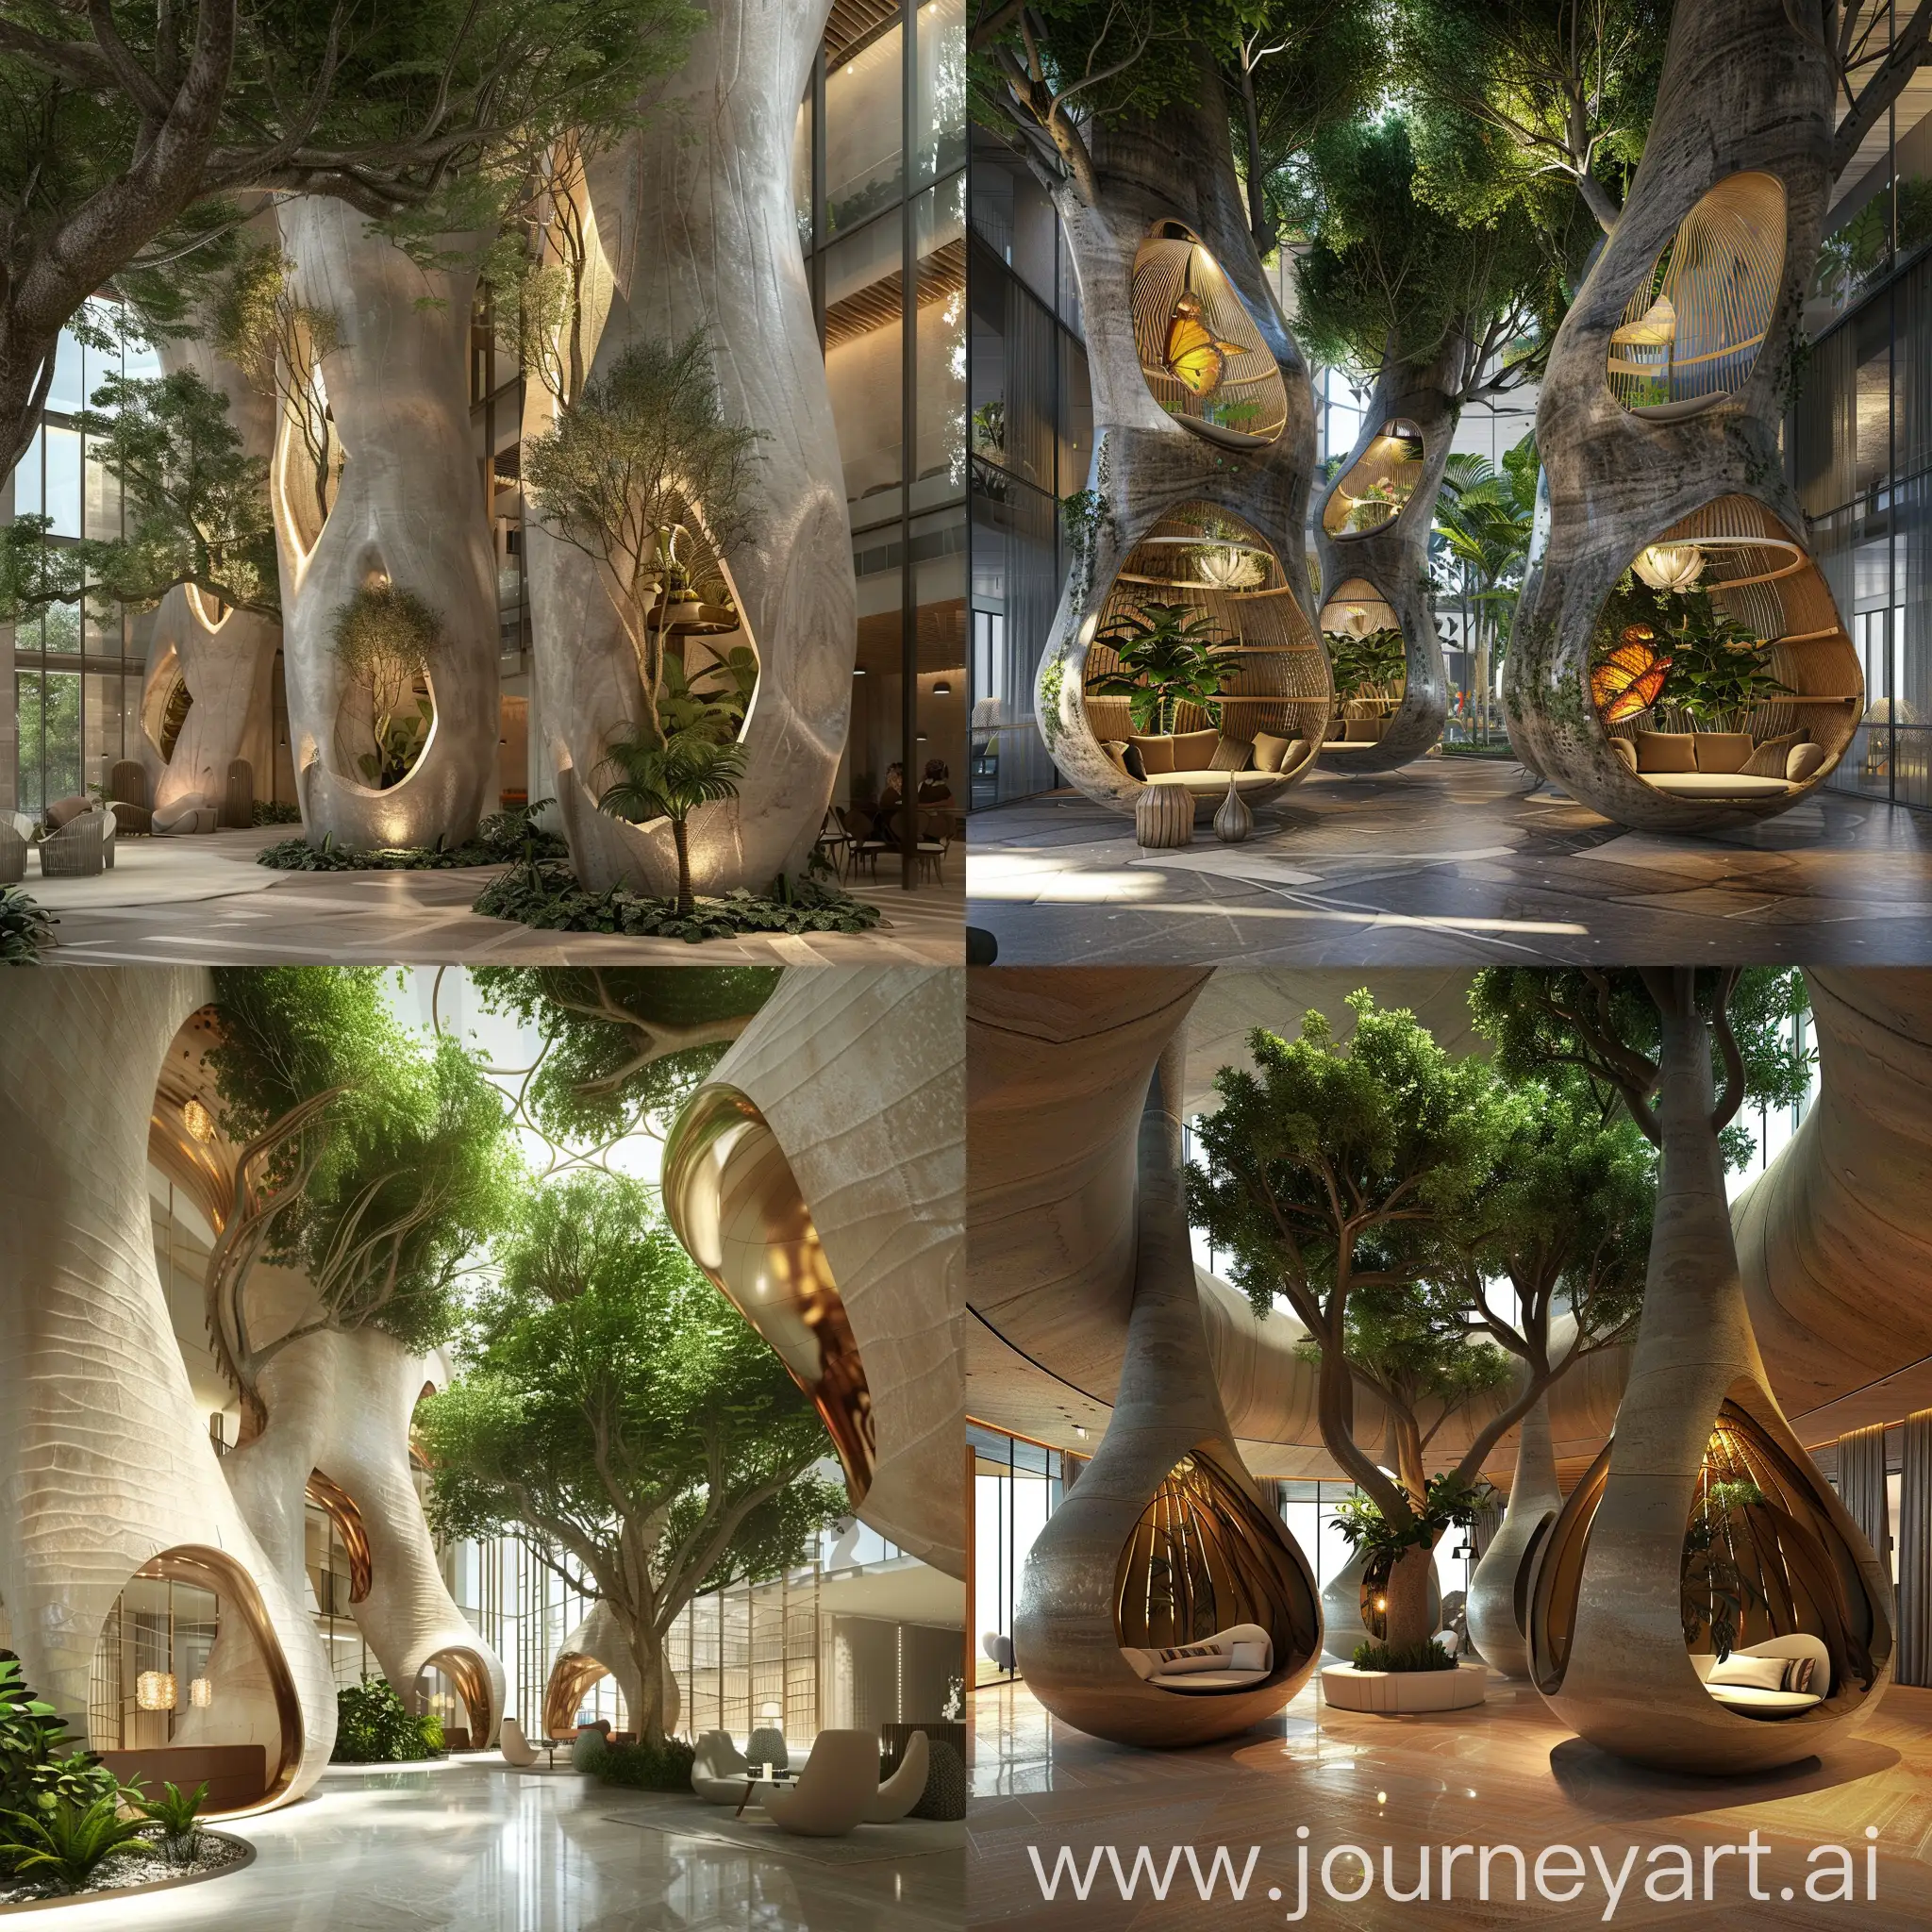 A hotel lobby design with very large trees inside and inspired by butterfly cocoons